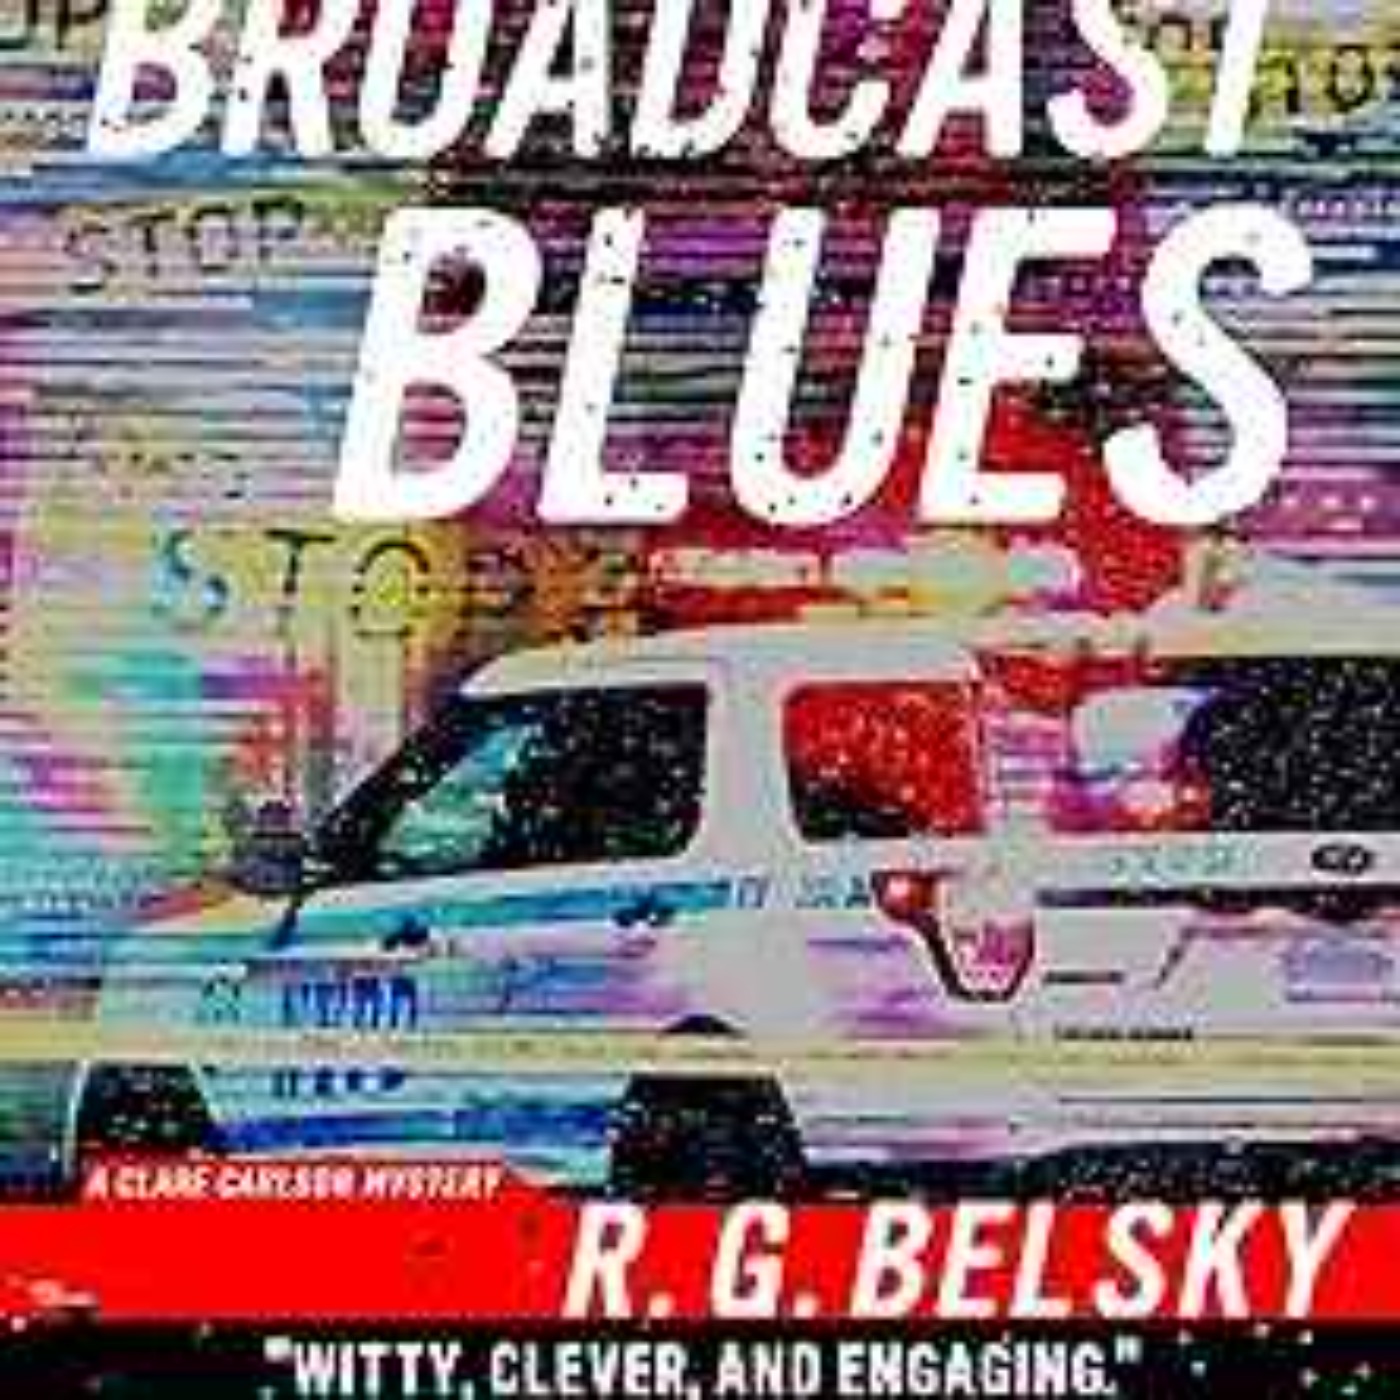 R. G. Belsky - Broadcast Blues (Clare Carlson Mystery Book 6)